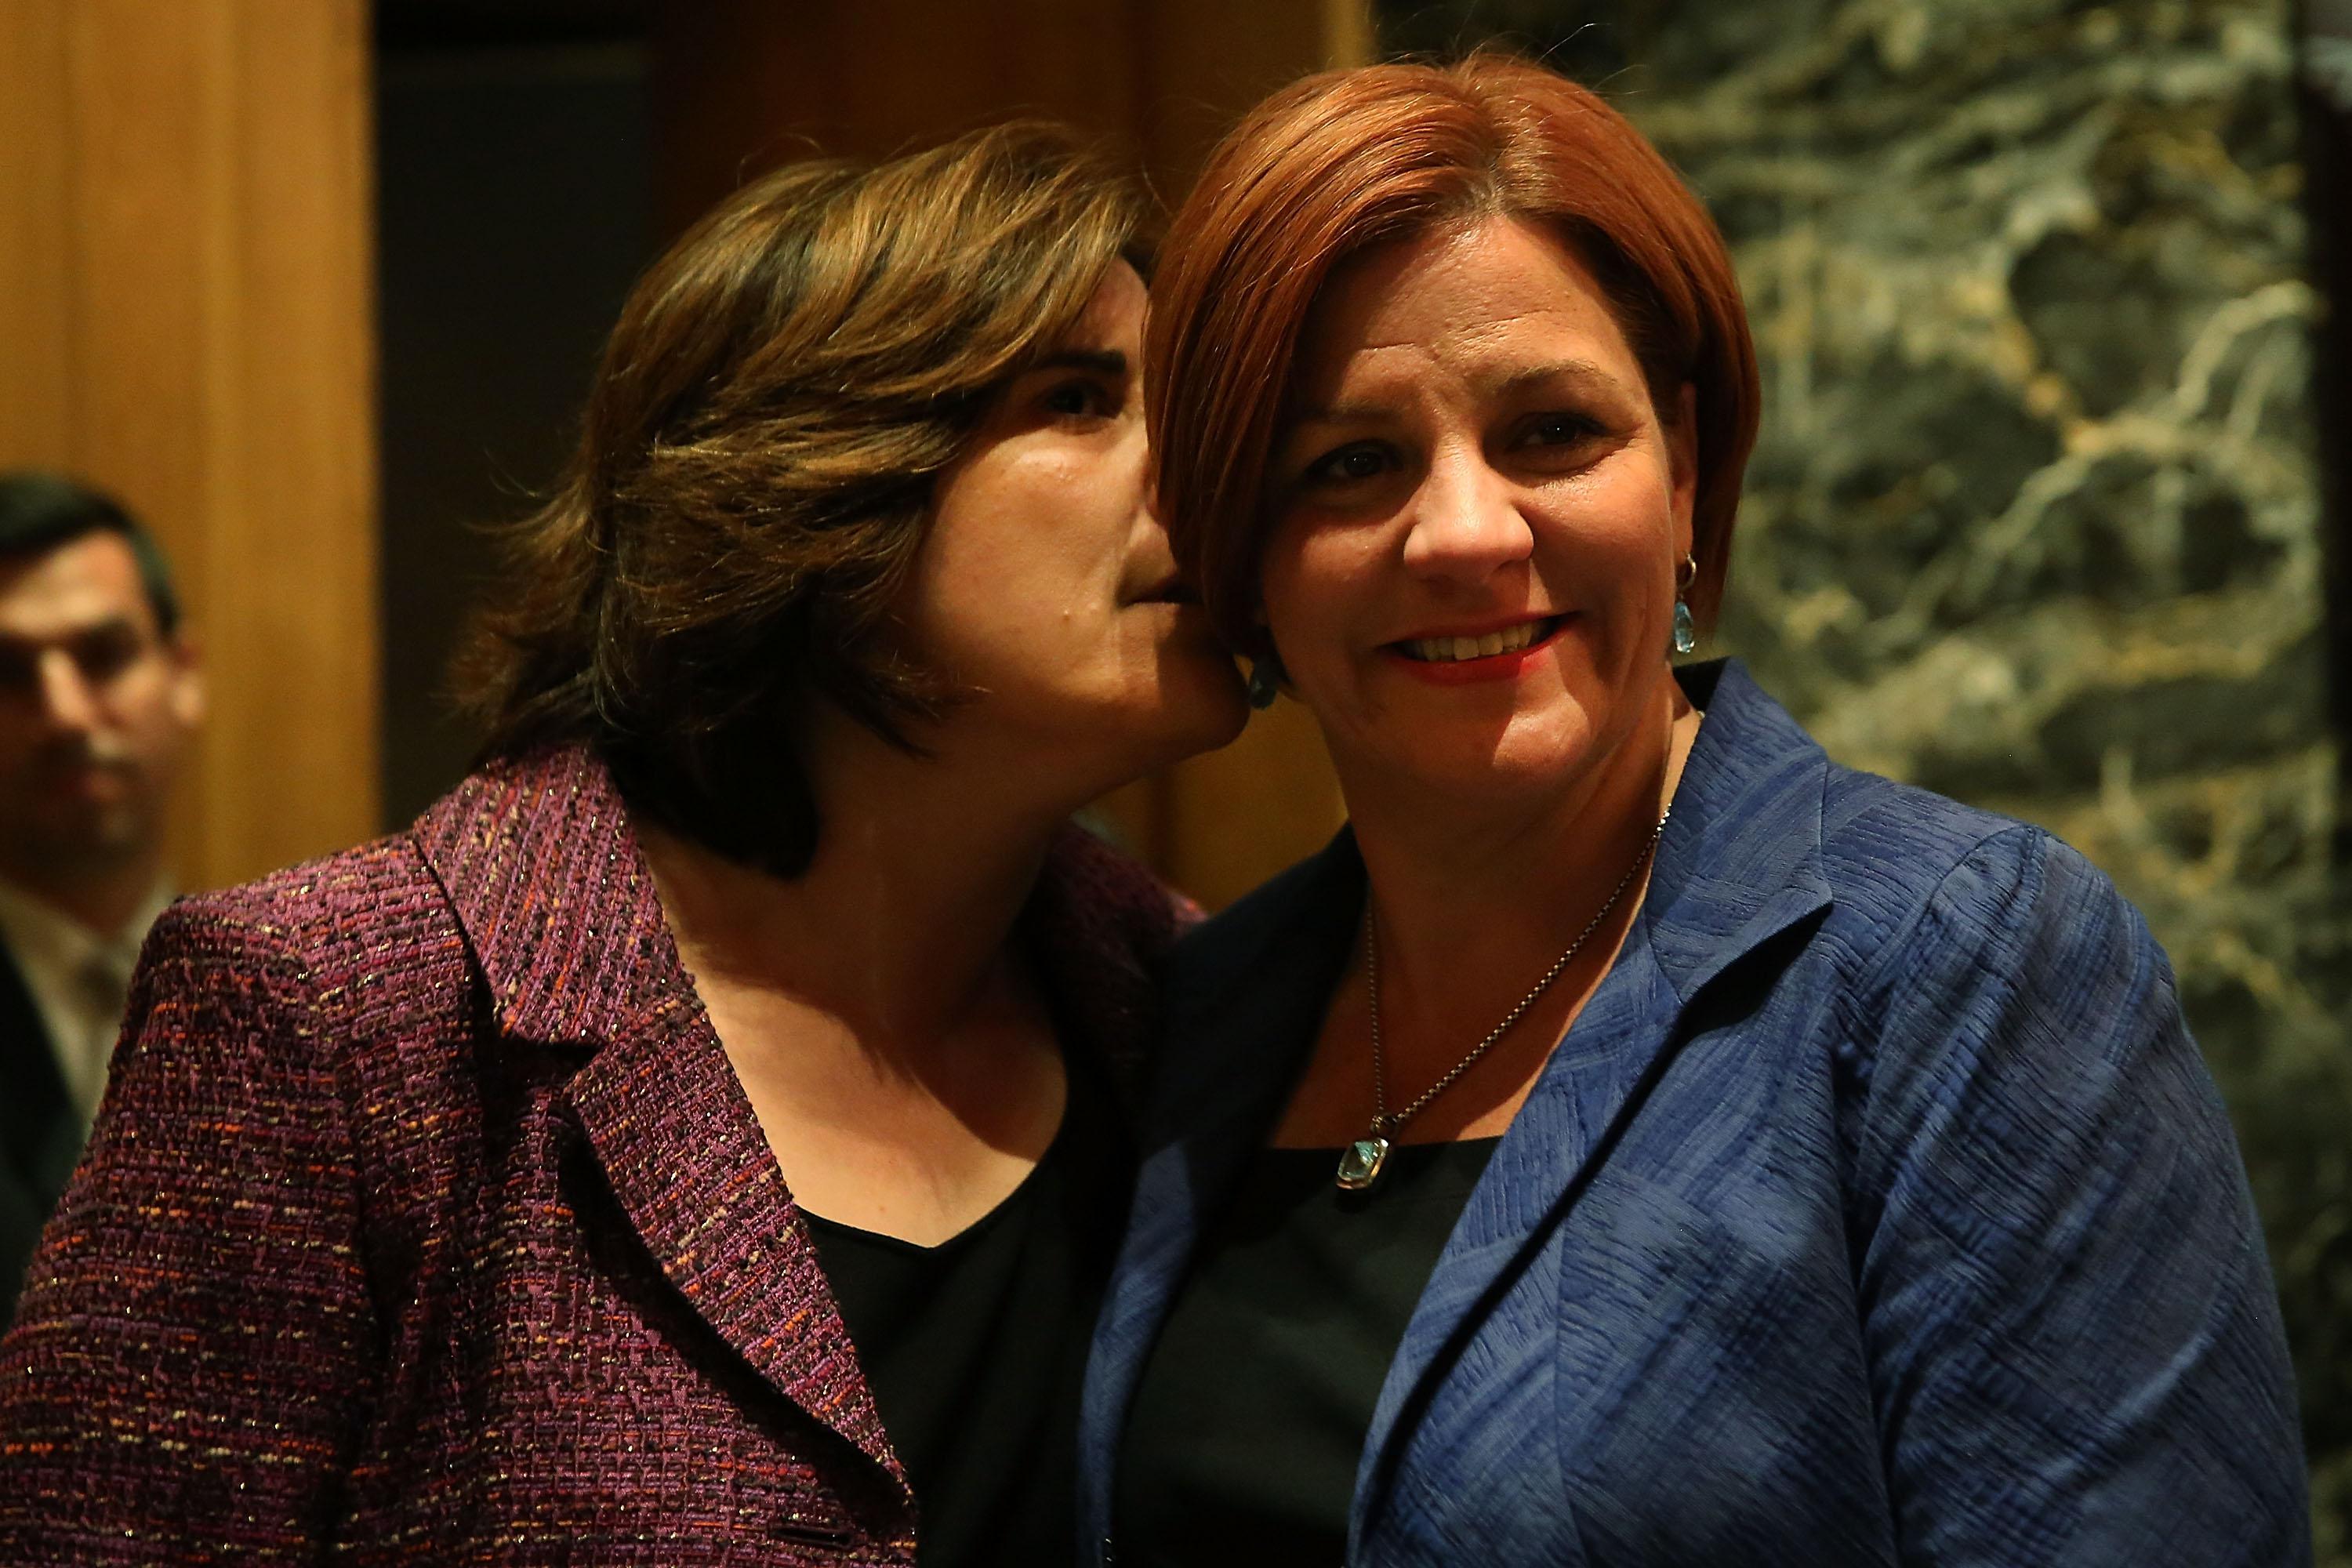 NEW YORK, NY - SEPTEMBER 10: New York City Council Speaker Christine Quinn (R) stands backstage with her wife Kim Catullo moments before conceding defeat in the New York Democratic mayoral primary elections on September 10, 2013 in New York City. Quinn, who lead early in the polls and who was endorsed by all of New York's major newspapers, saw her lead slip away in the final weeks of the campaign. Quinn would have been the first woman and lesbian to hold the job of mayor. (Photo by Spencer Platt/Getty Images)